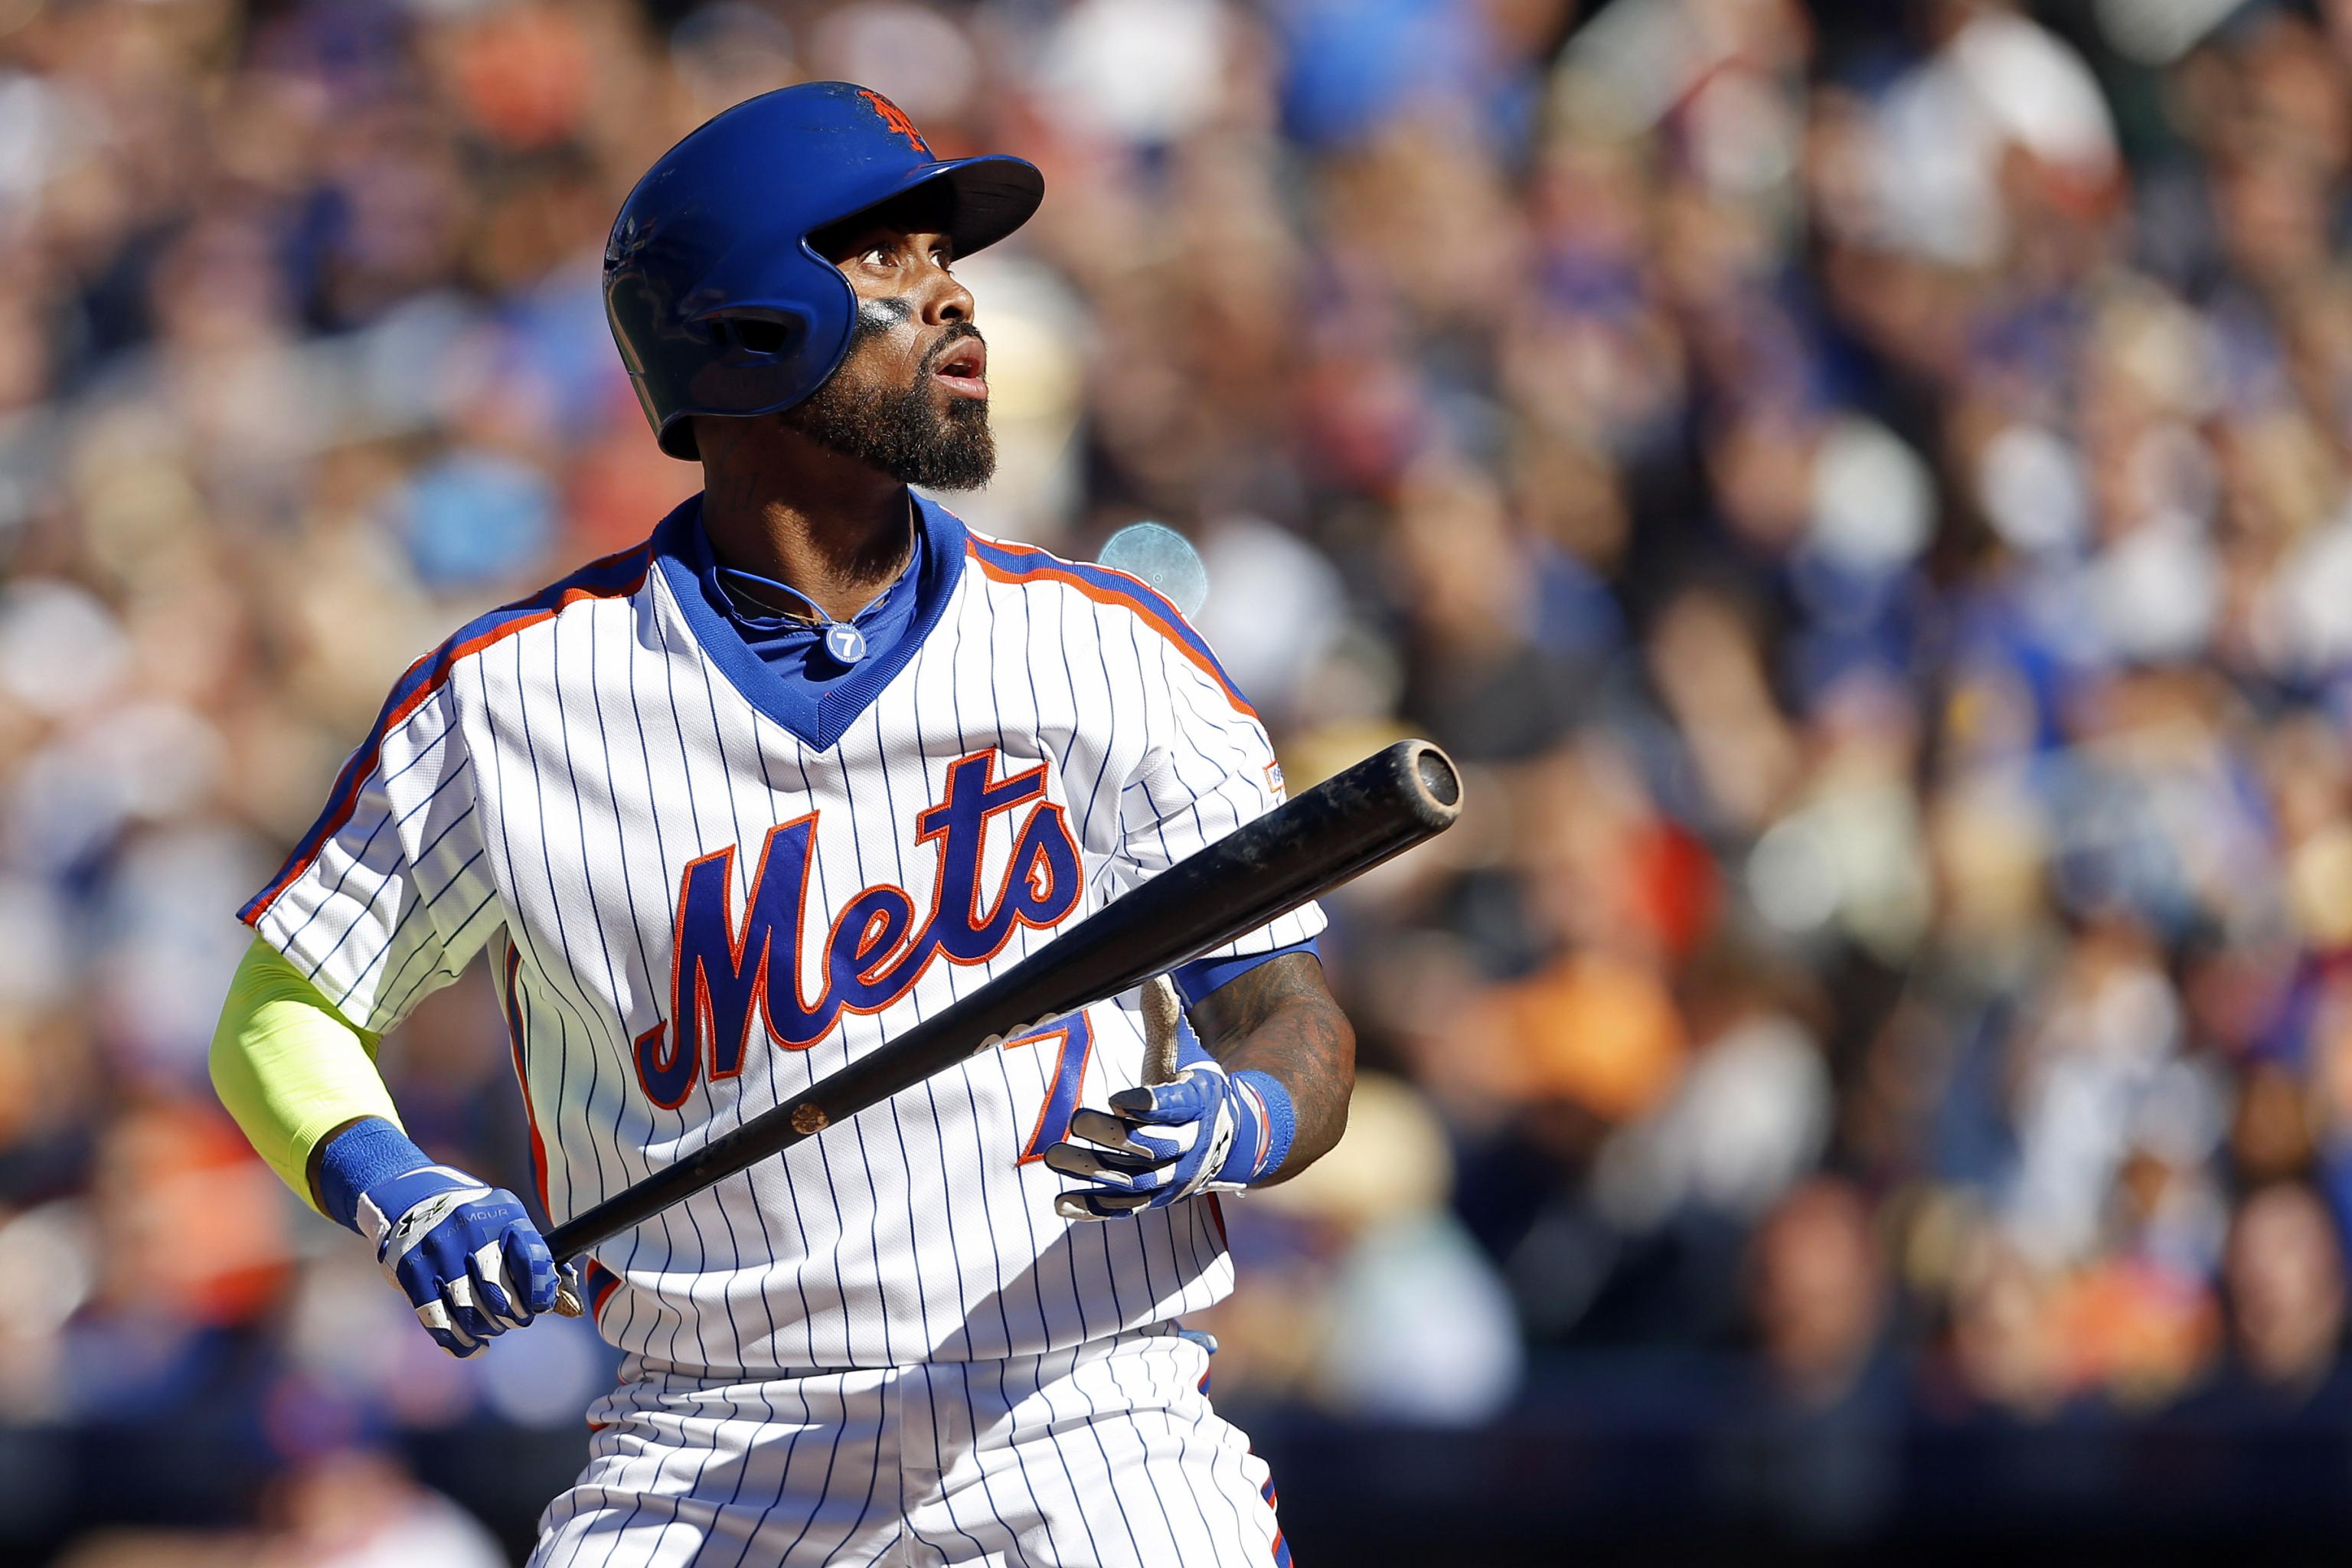 Jose Reyes skips court appearance, admits love child is his